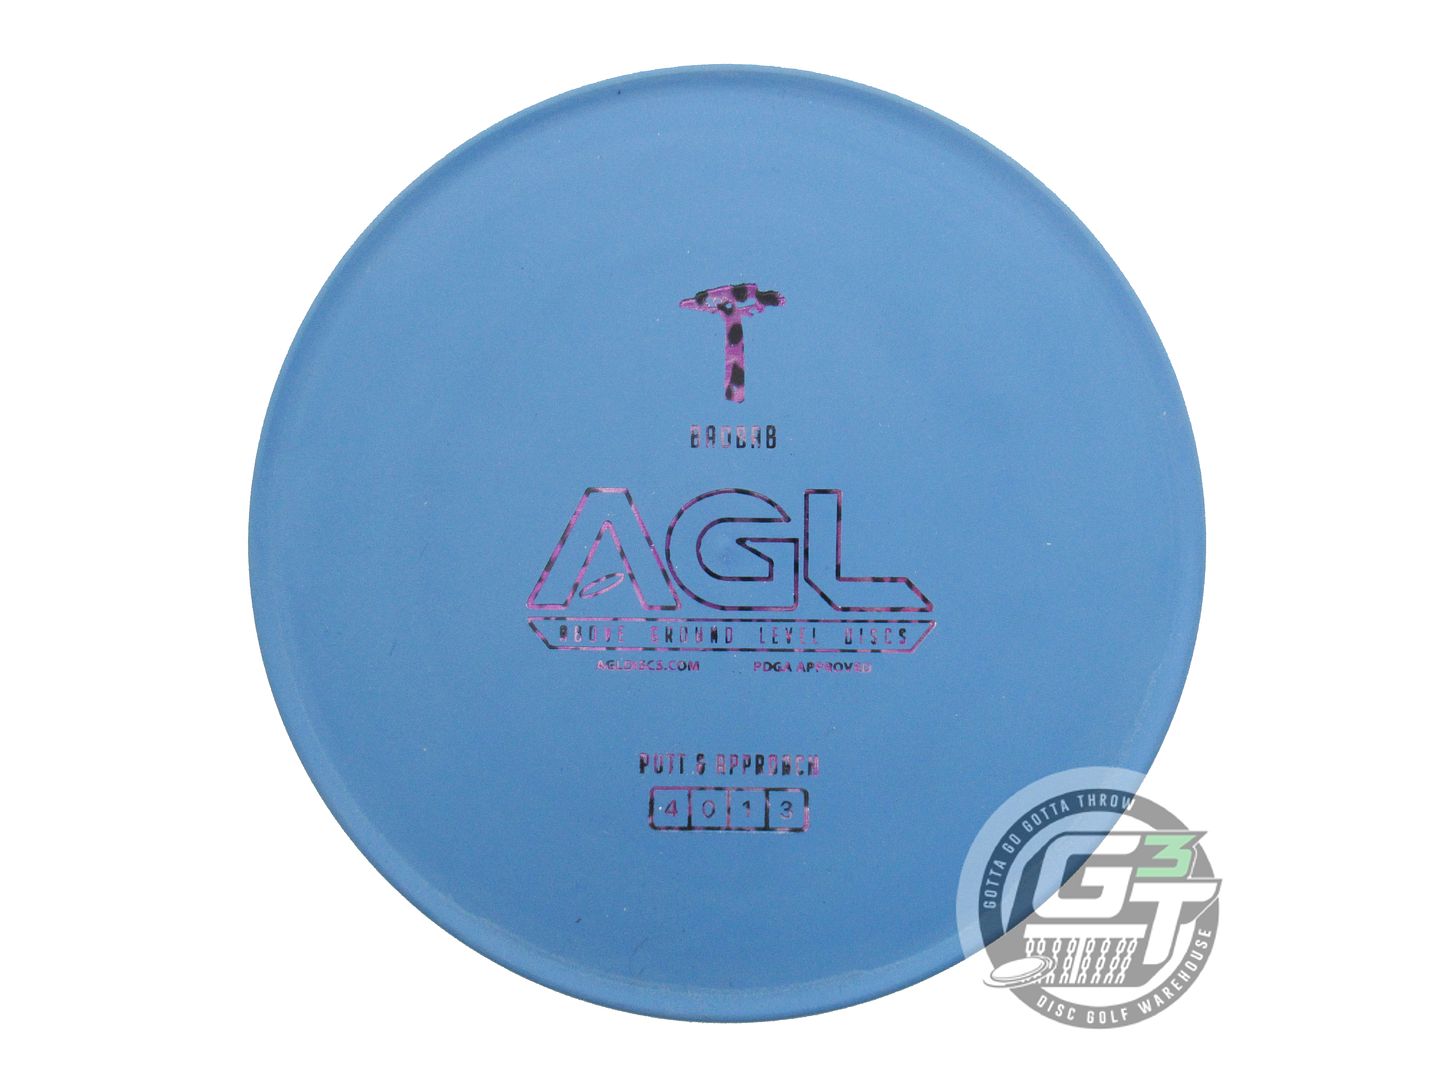 Above Ground Level Alpine Baobab Putter Golf Disc (Individually Listed)